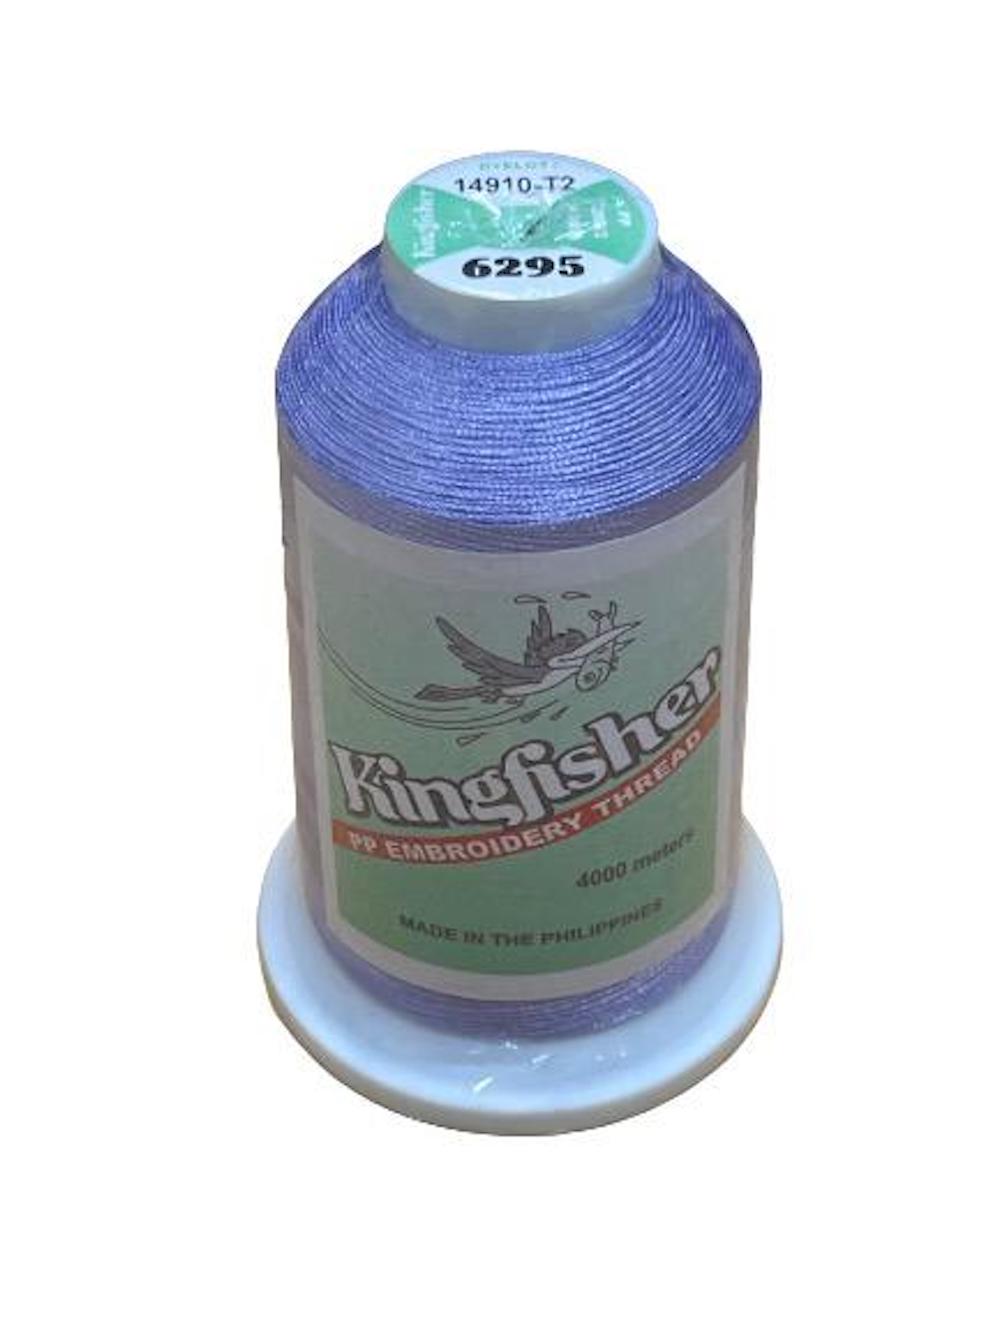 King Fisher Embroidery Thread 4000m 6295 - MY SEWING MALL